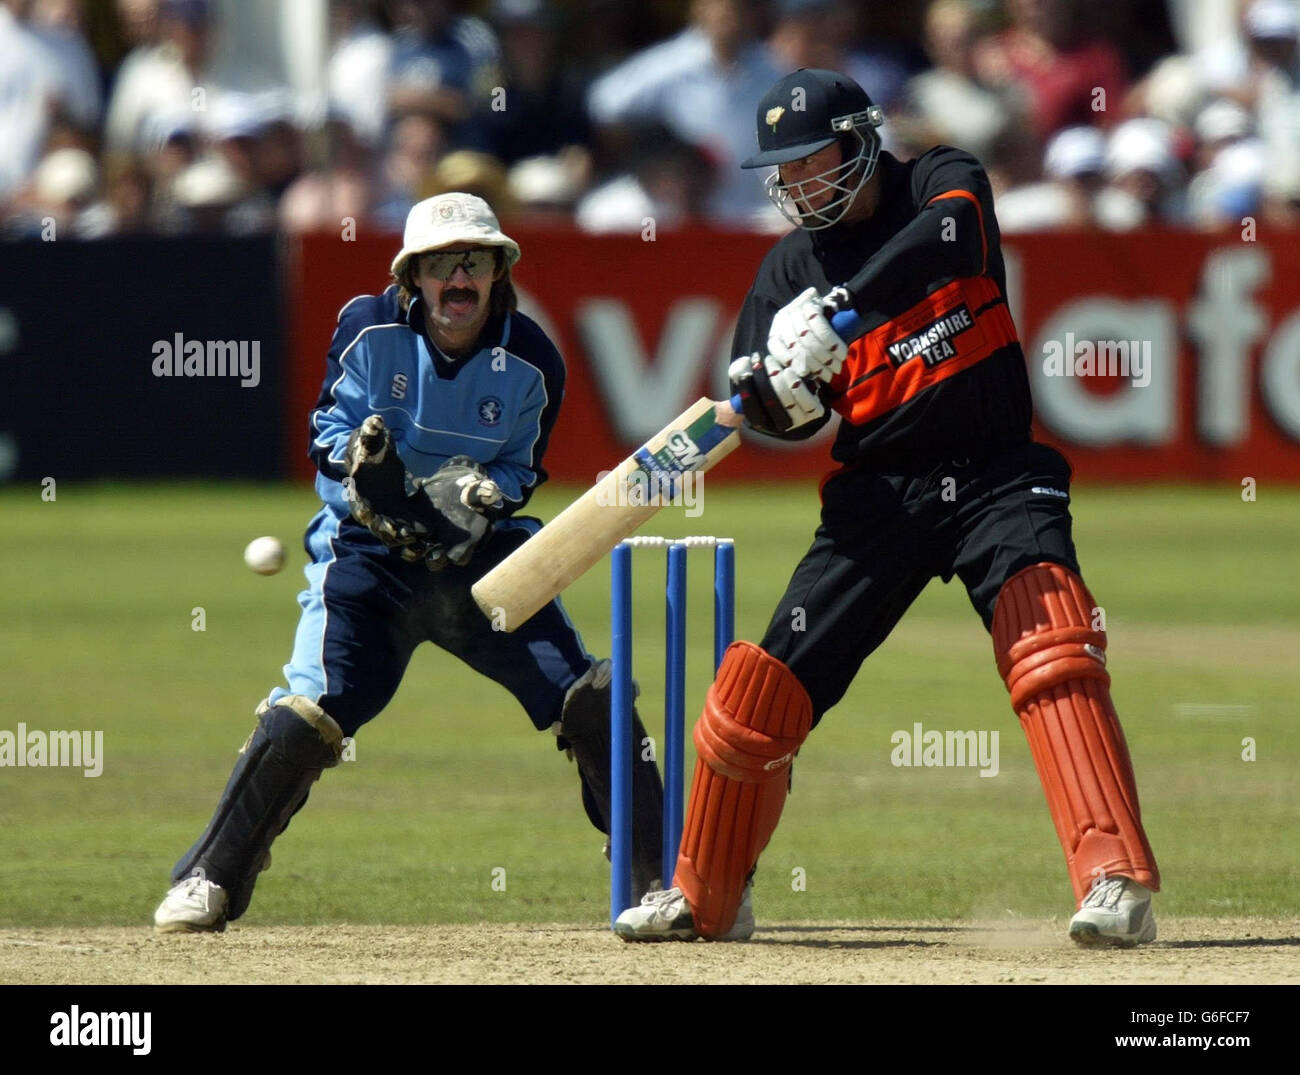 Yorkshire's Craig White cuts a delivery during his innings of 27 in the National League Division One match at the Cheltenham College Ground, Cheltenham. Stock Photo